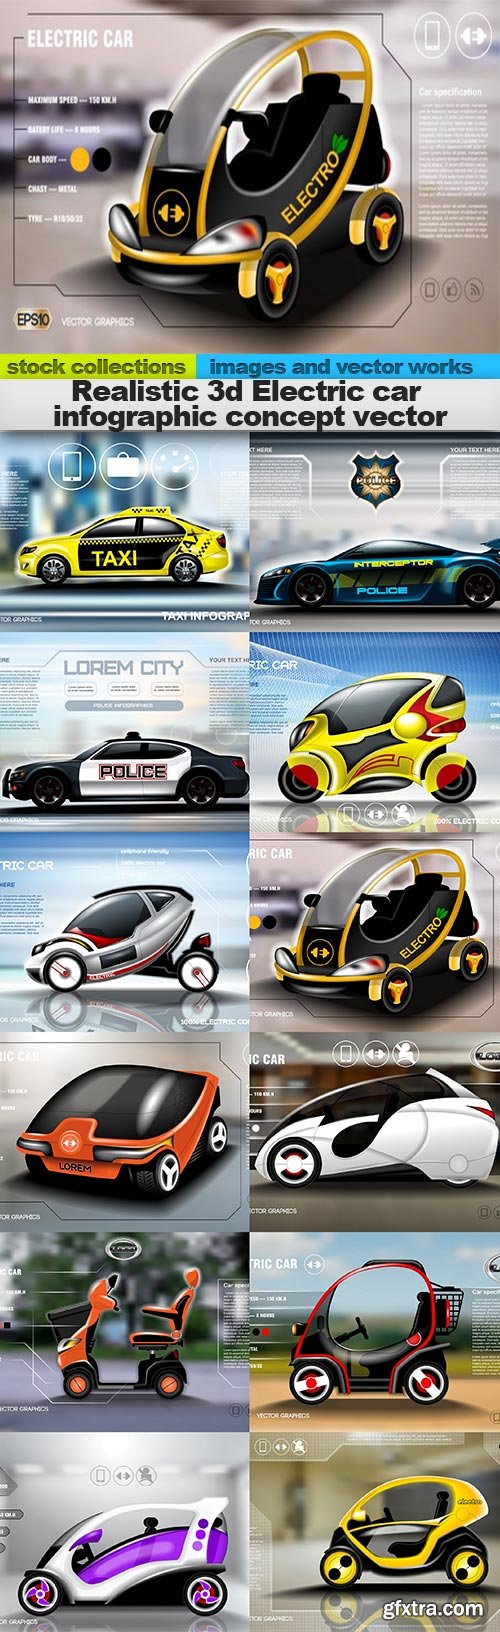 Realistic 3d Electric car infographic concept vector, 12 x EPS